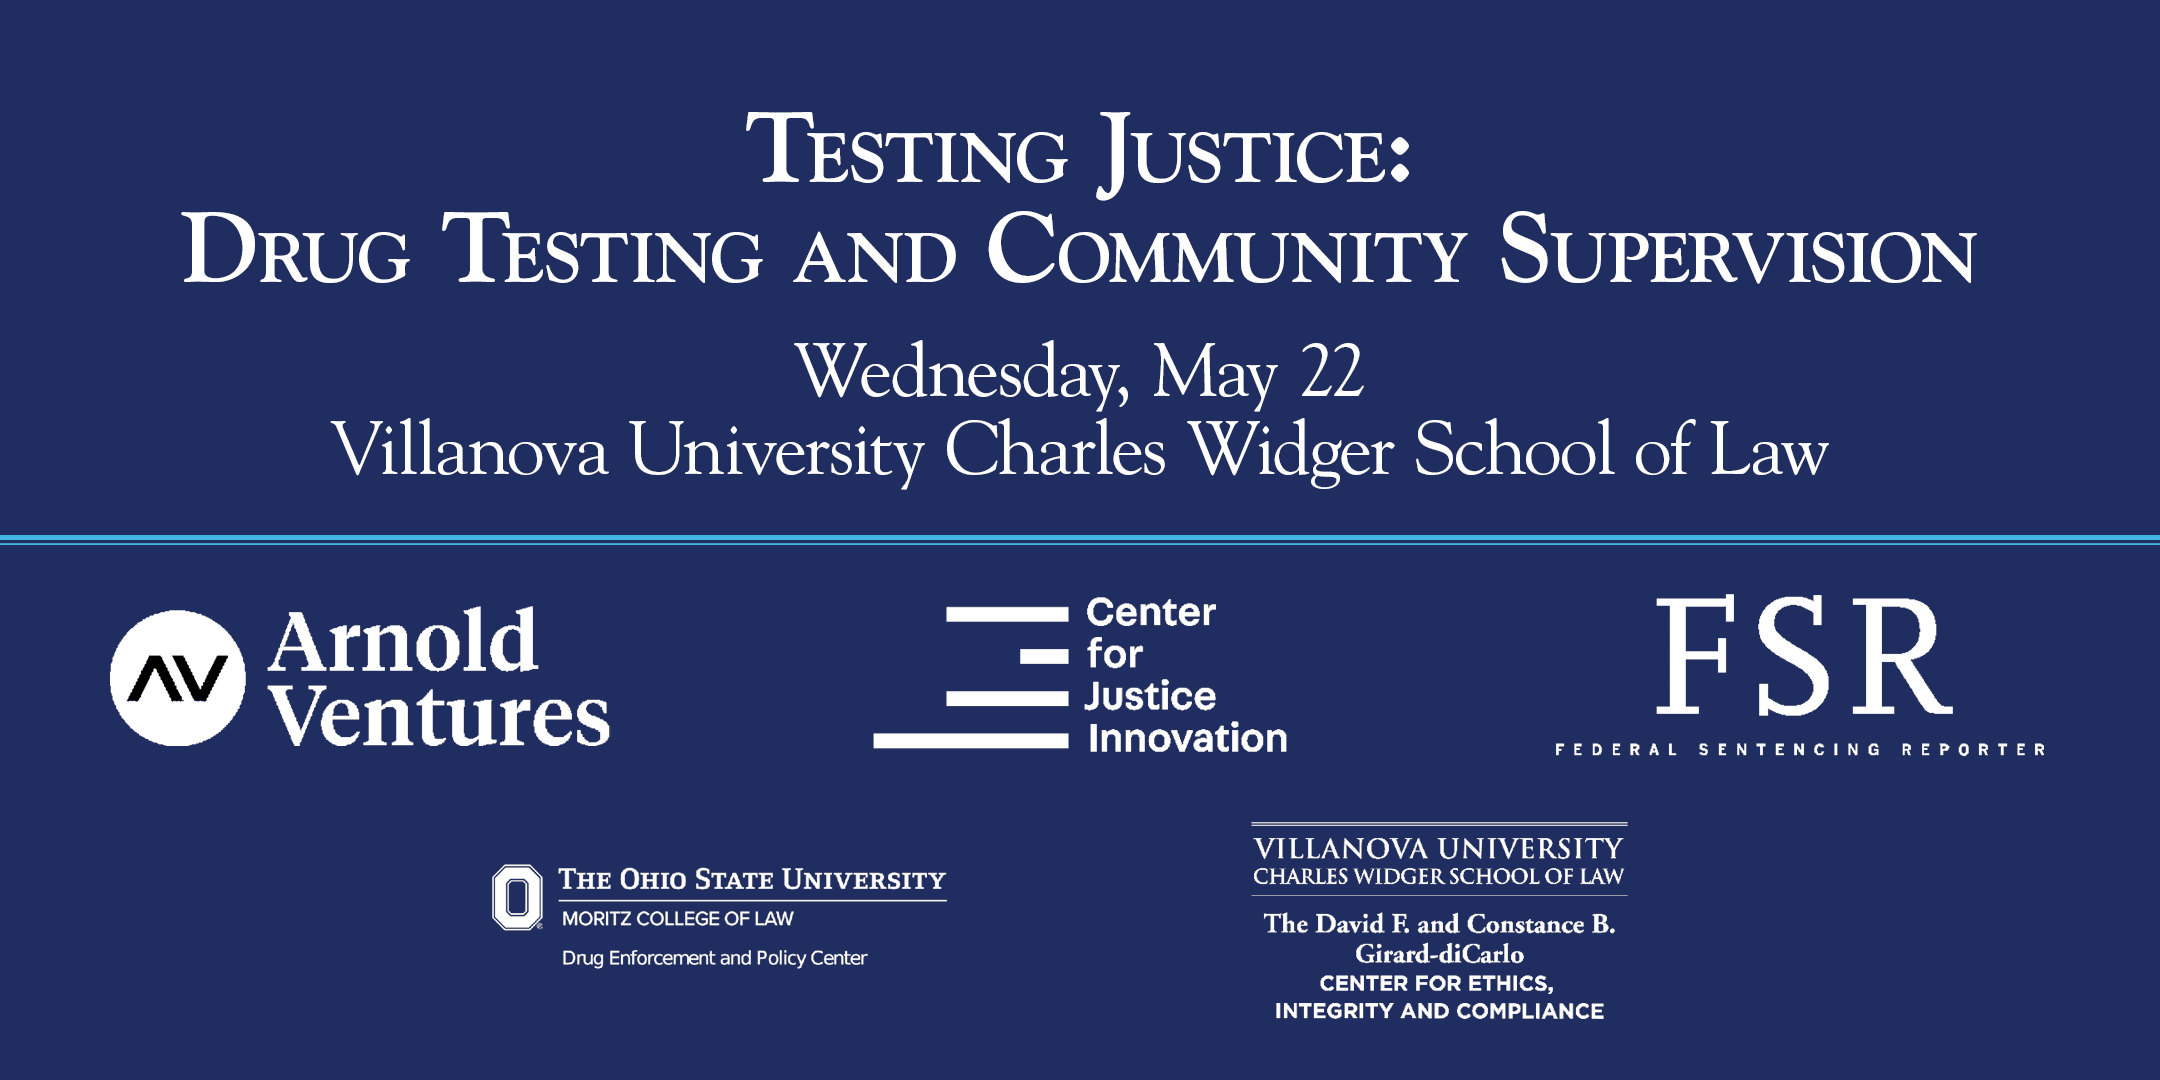 Testing Justice: Drug Testing and Community Supervision